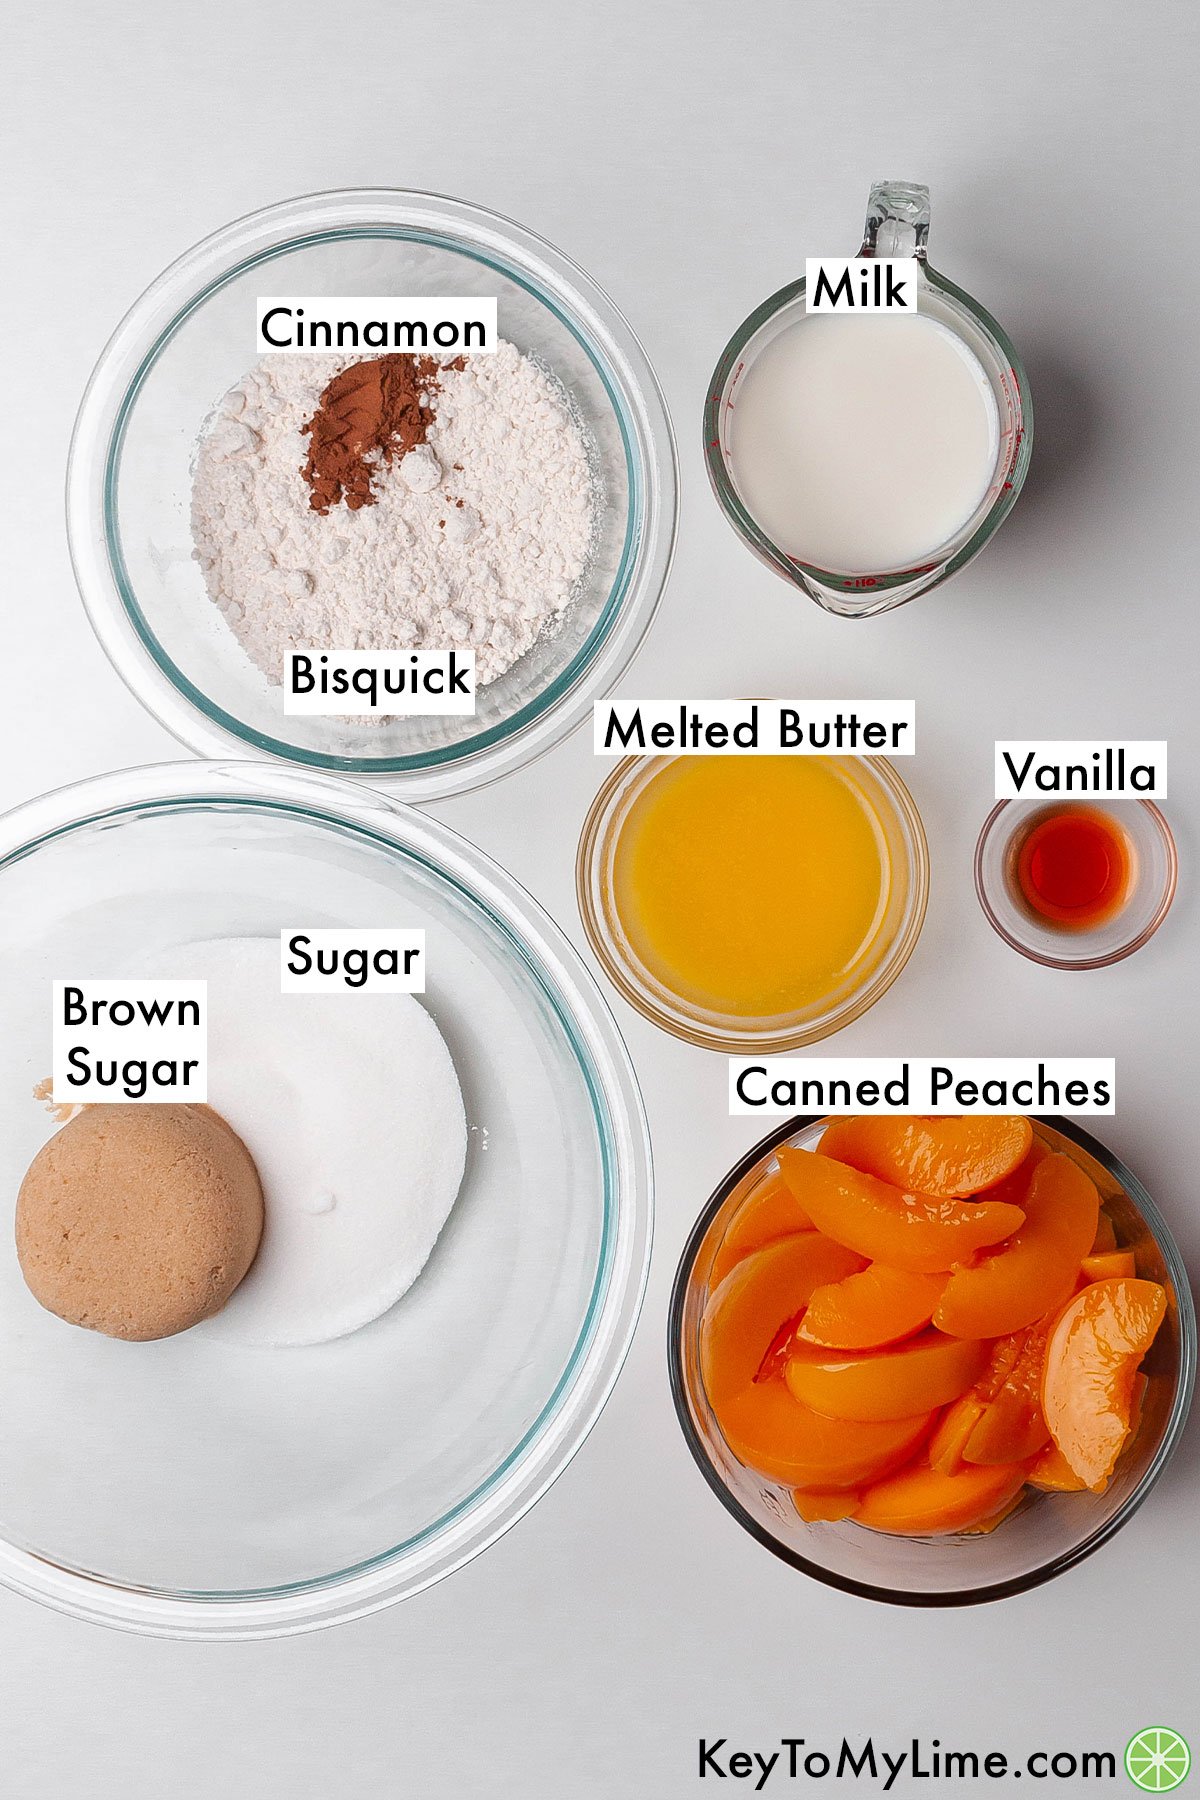 The labeled ingredients for Bisquick peach cobbler.